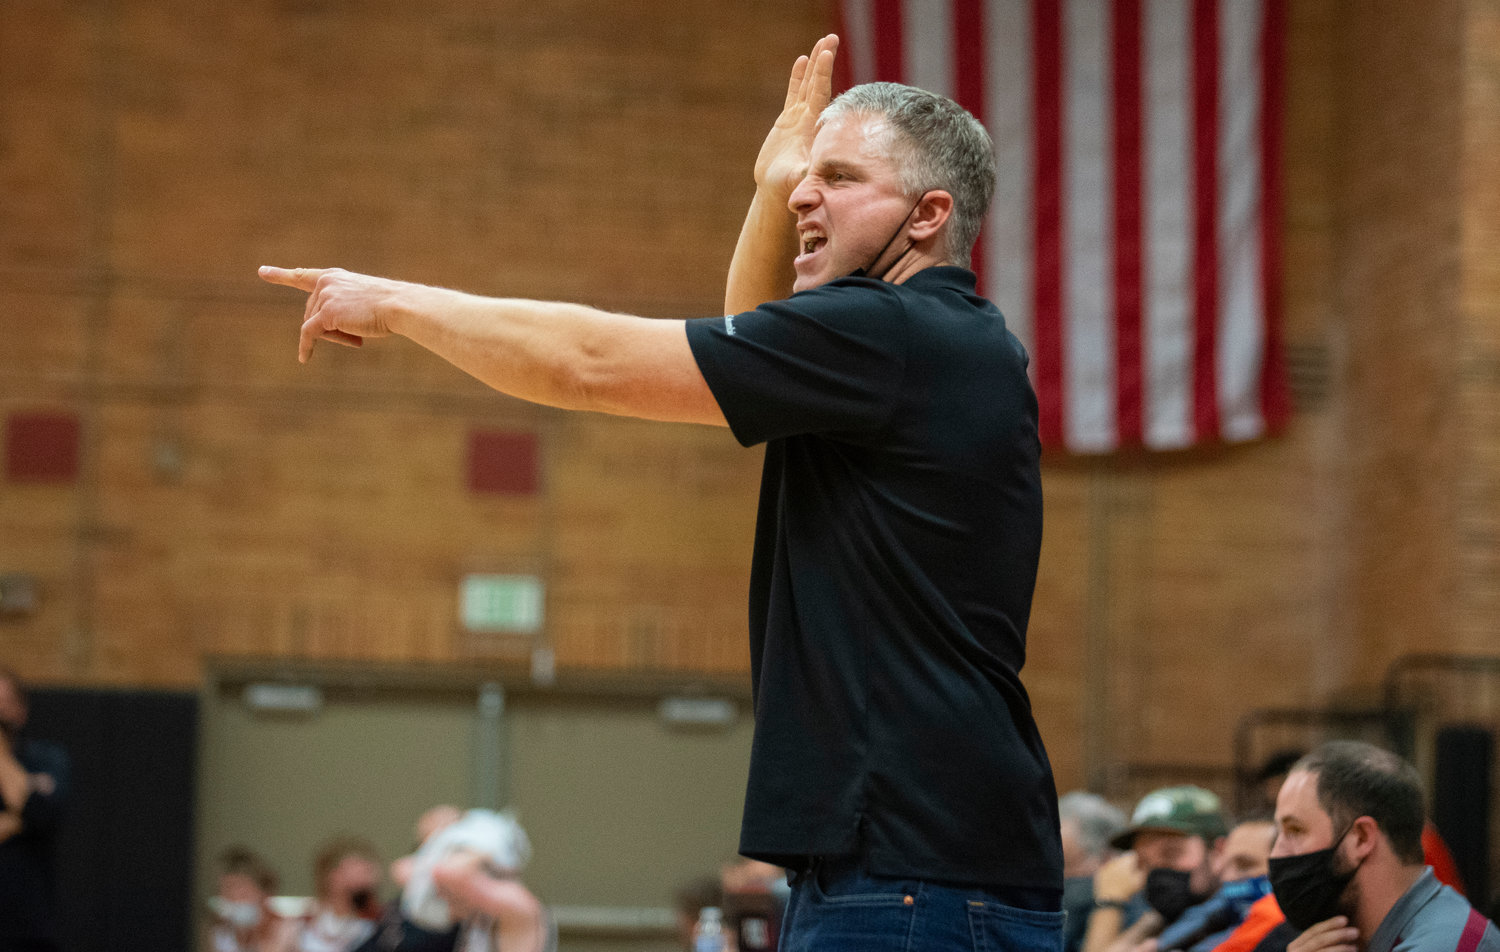 W.F. West coach Chris White calls out instructions to his team in the second quarter of the Bearcats' win over Centralia Monday.